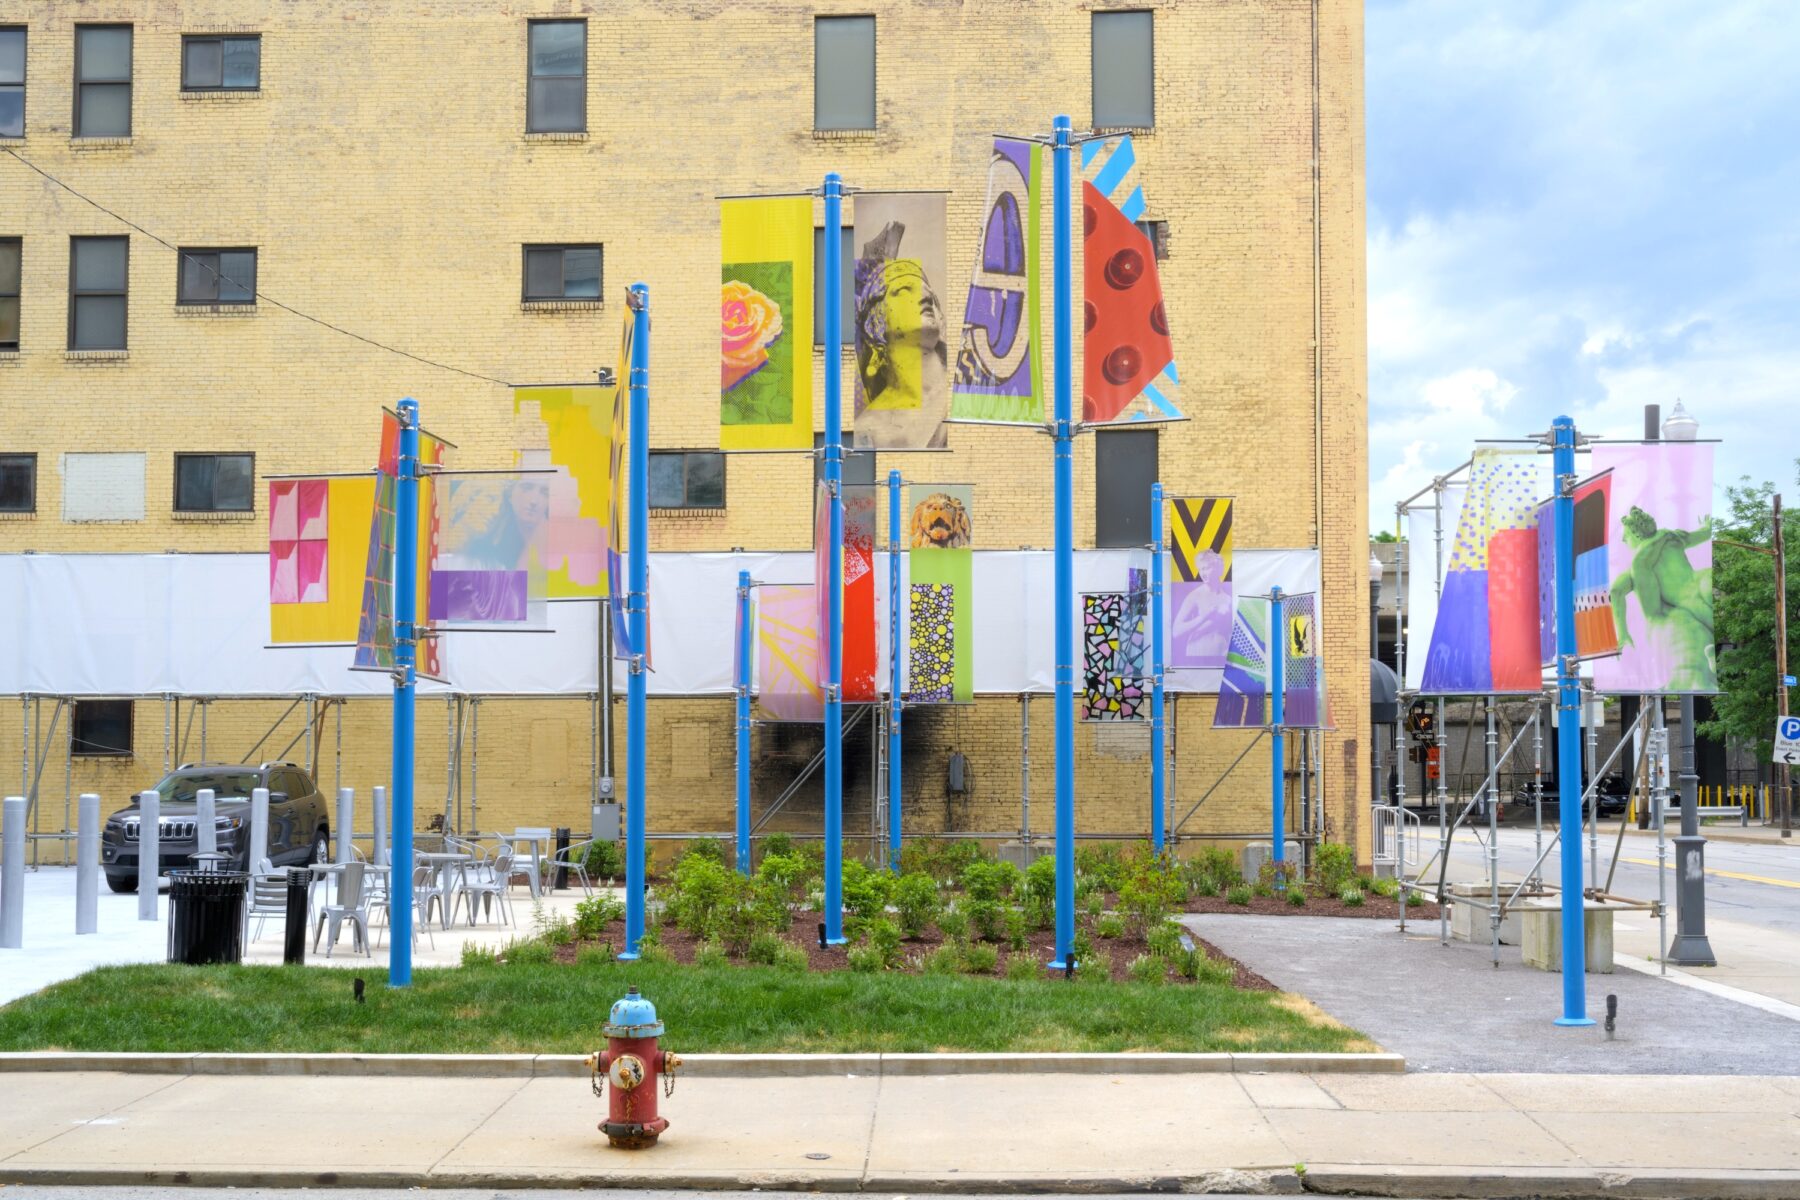 Installation image of art on 9 blue poles each with two colorful transparent banners that have various images on them.